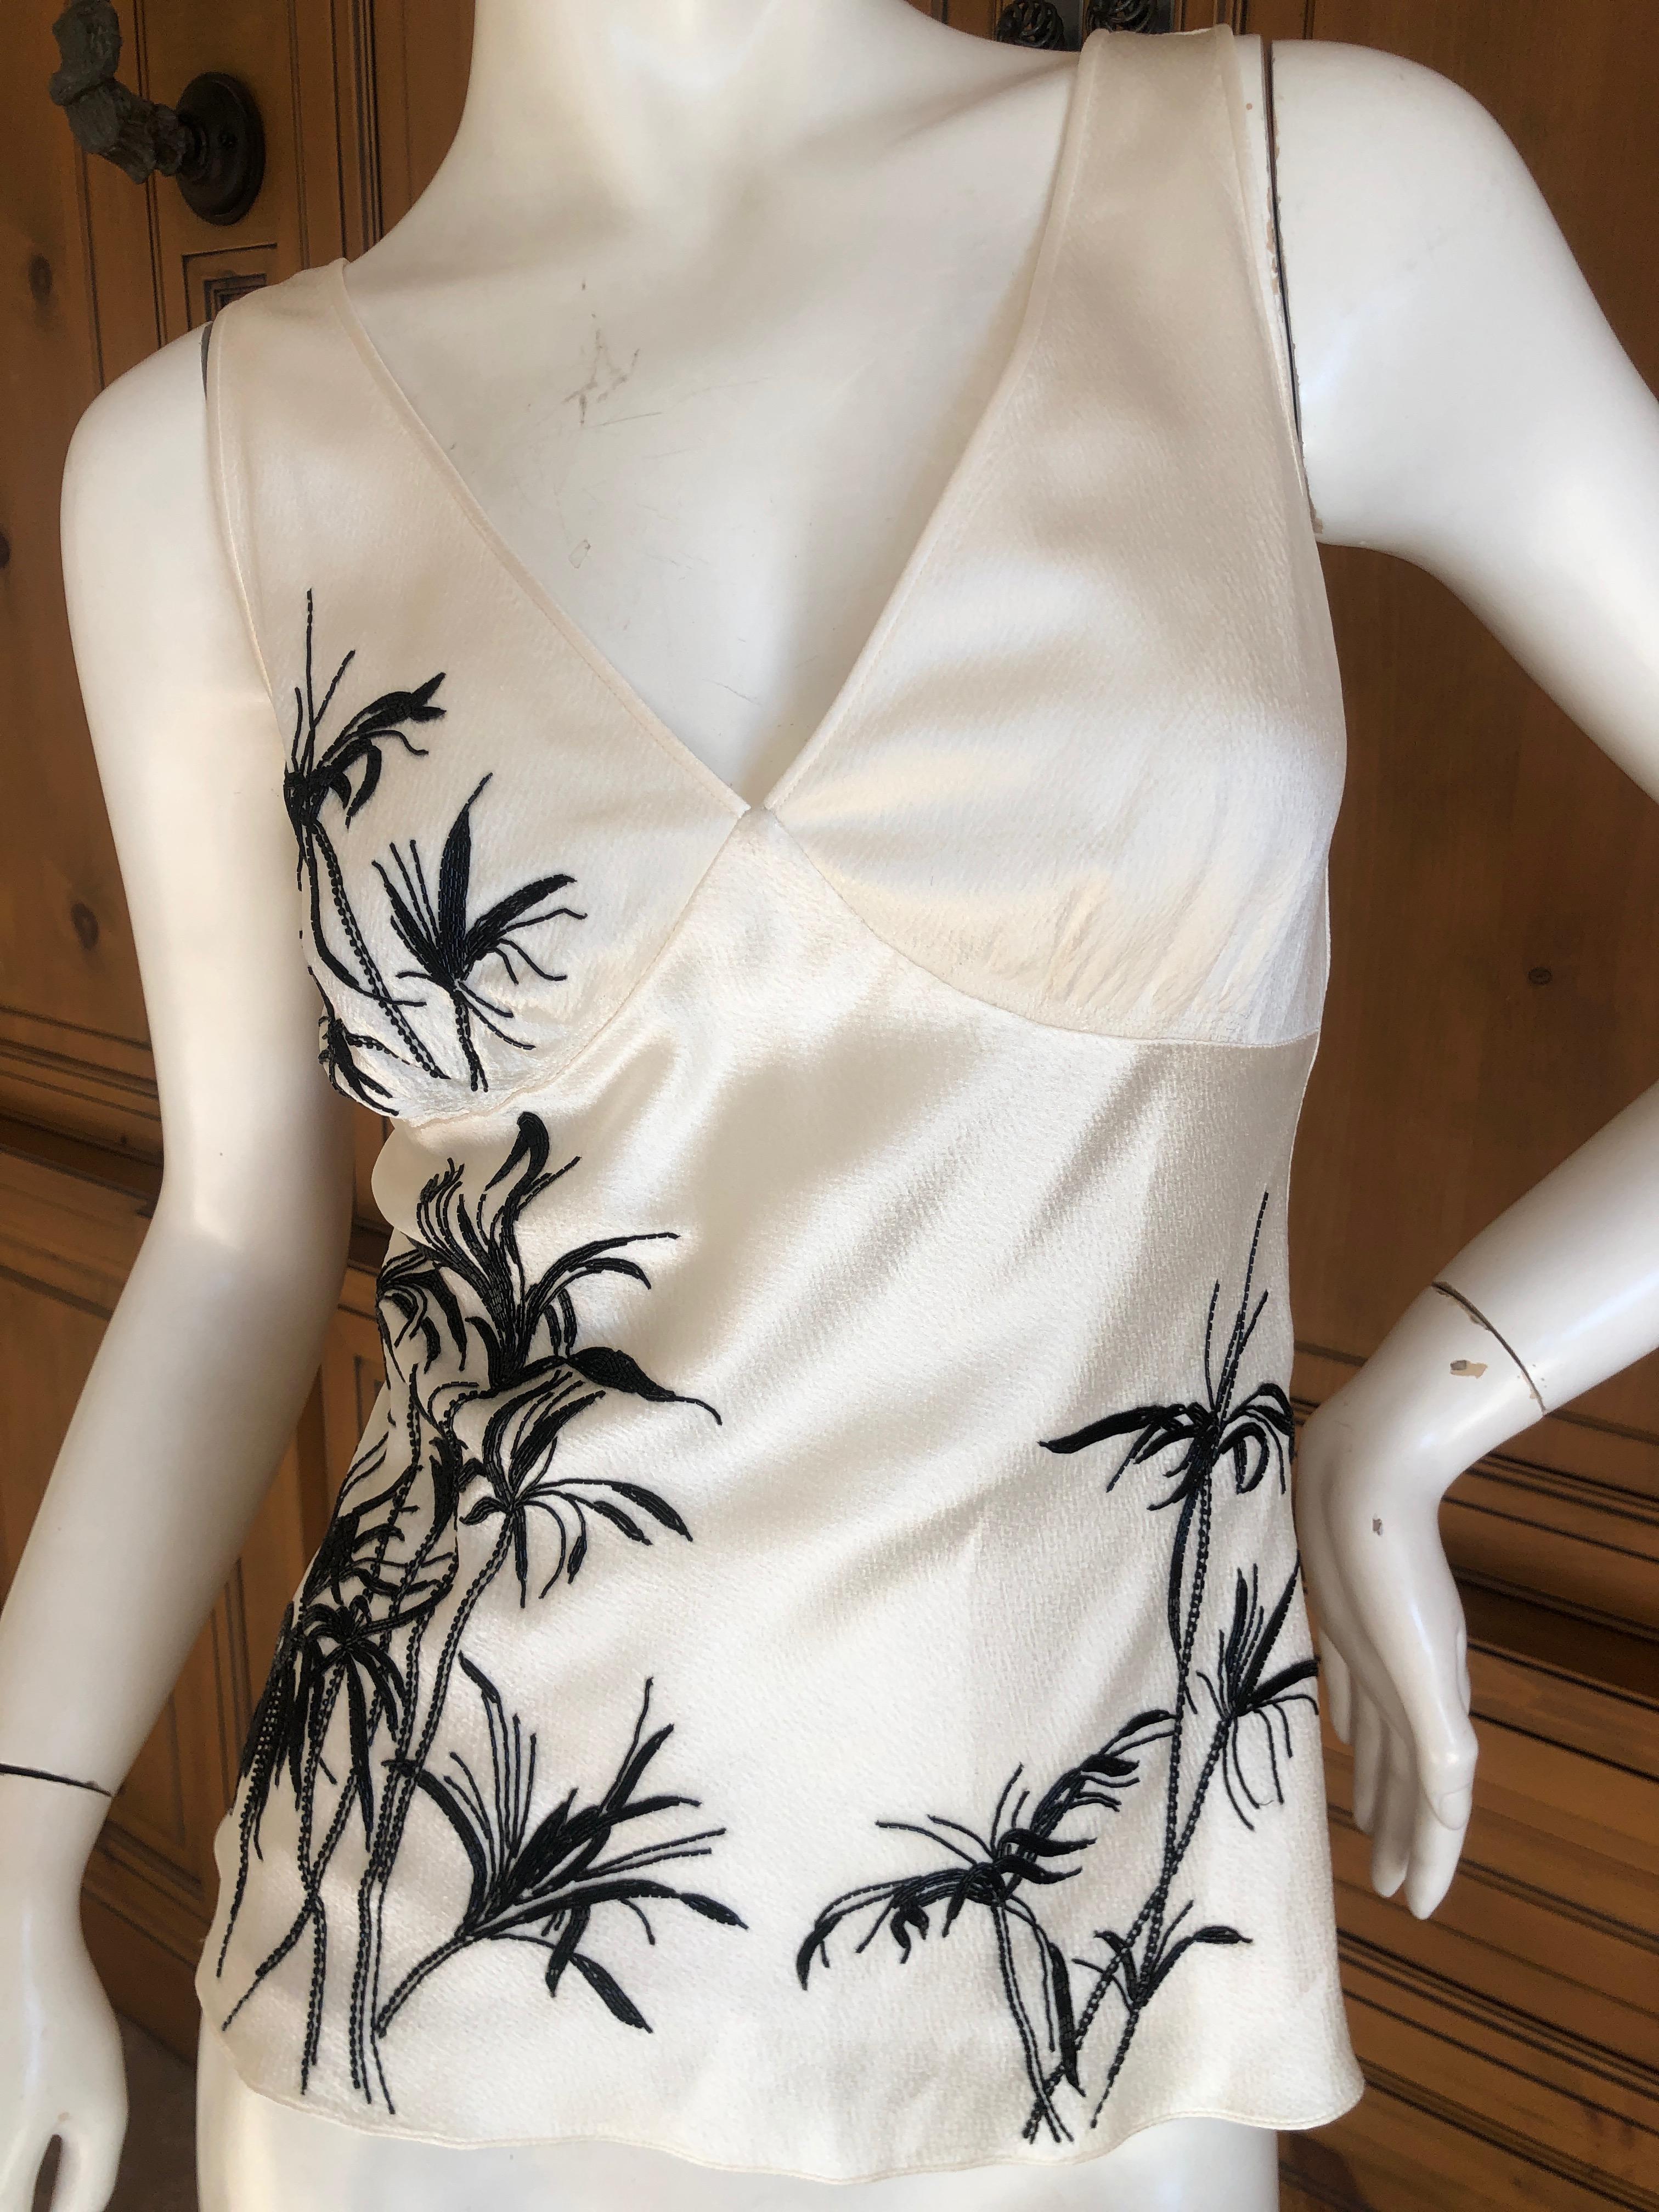 Wonderful Christian Dior by Gianfranco Ferre 1994 Hammered Silk Top with Lesage Floral Beading
So beautiful, the beads are tiny black bugle beads
SIze 36
Bust 36